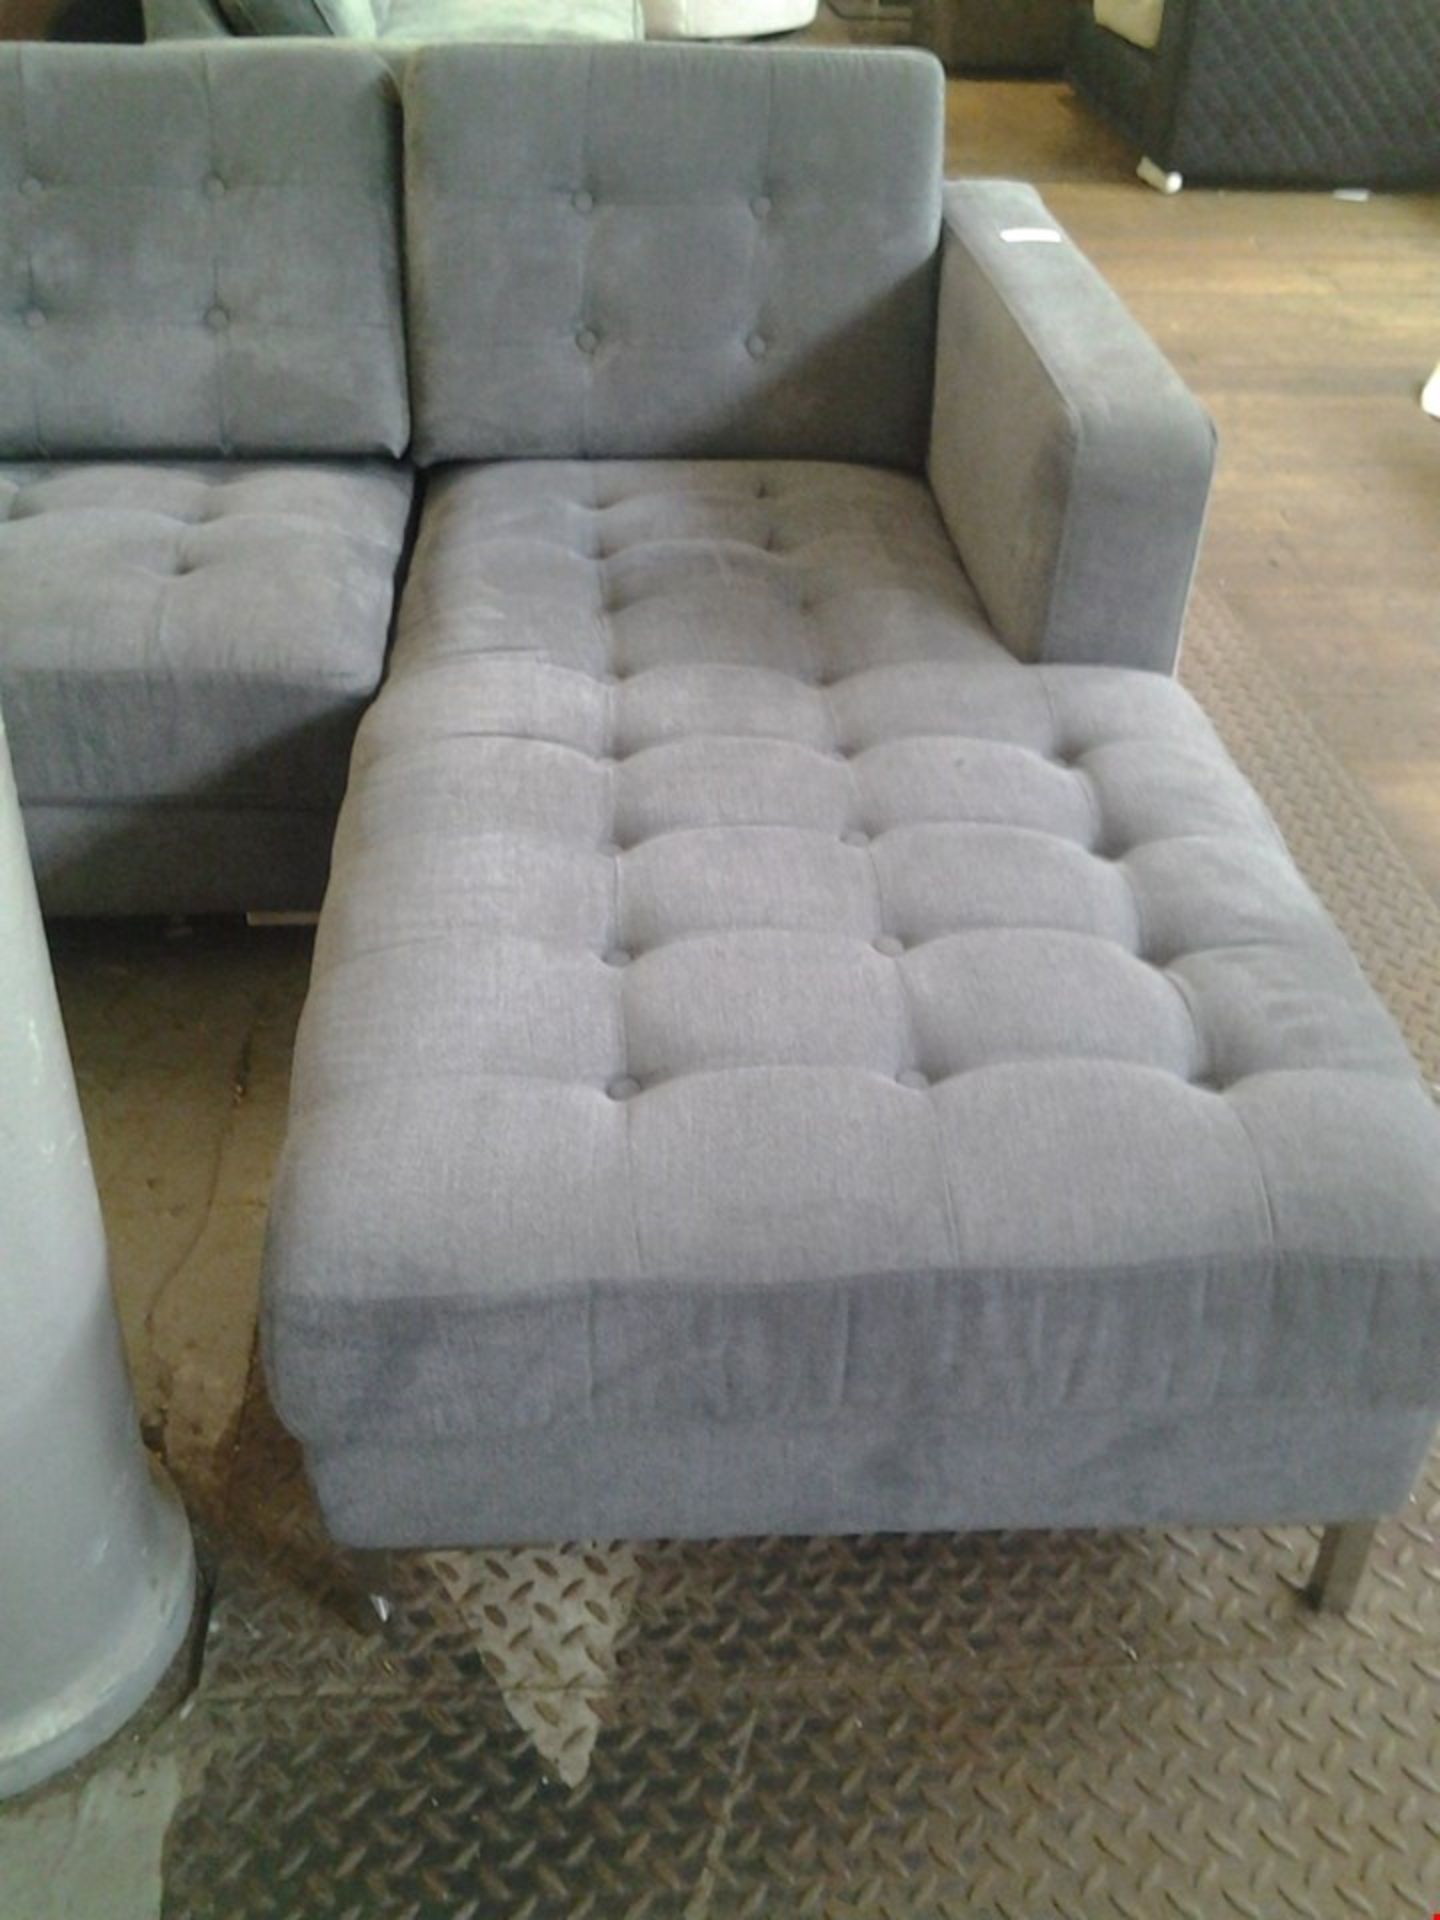 DESIGNER GREY BUTTON FABRIC 3 SEATER CHAISE SOFA. - Image 2 of 2